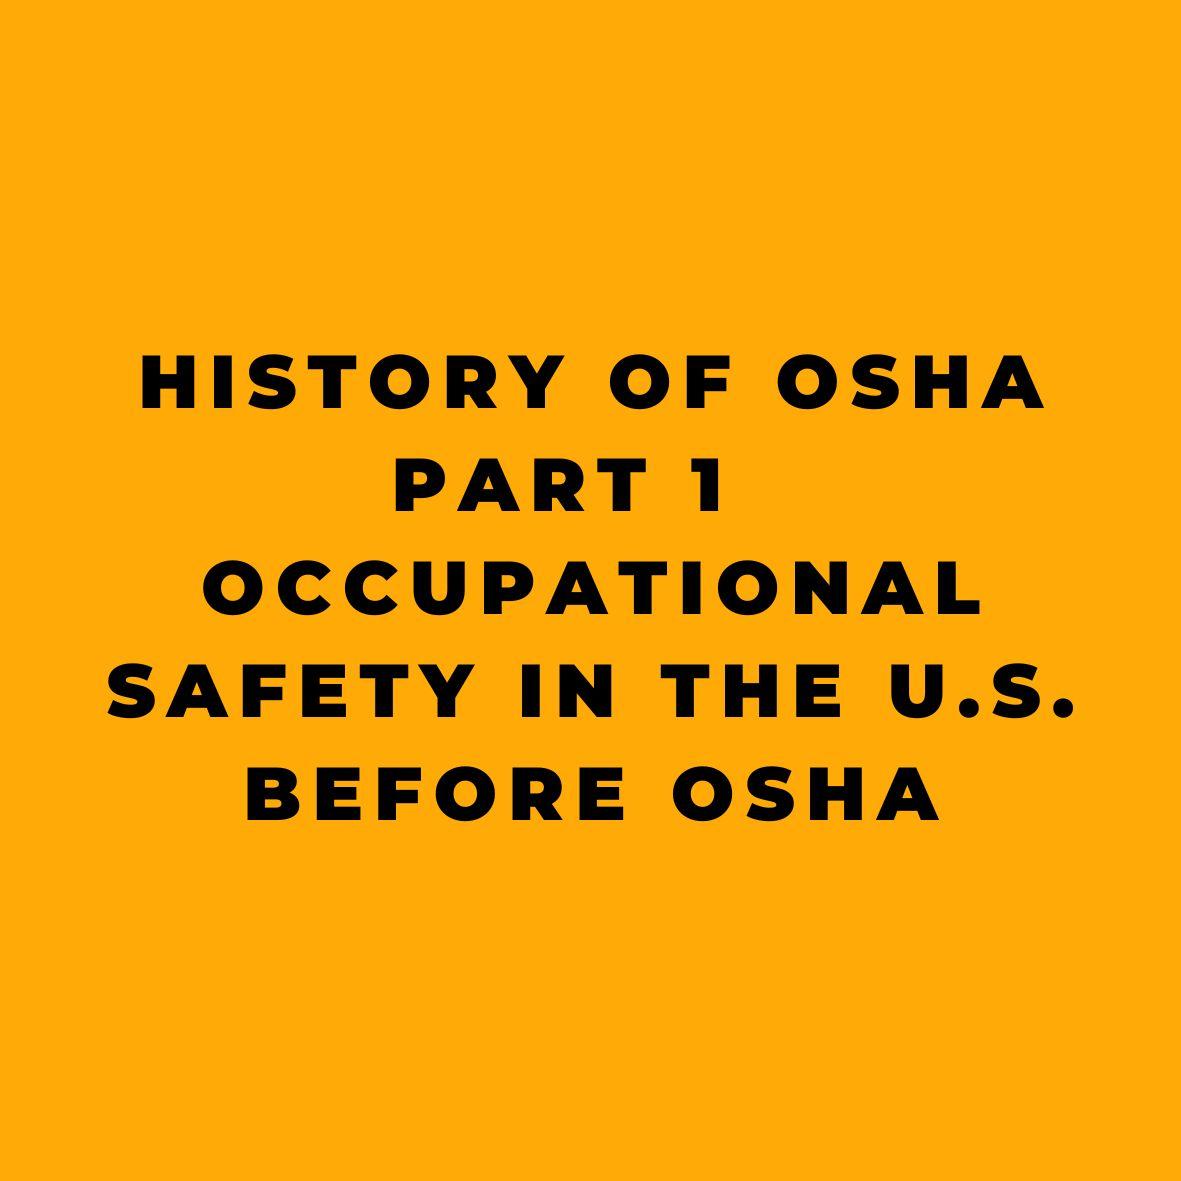 History of OSHA - Part 1 - Occupational Safety in the U.S. Before OSHA